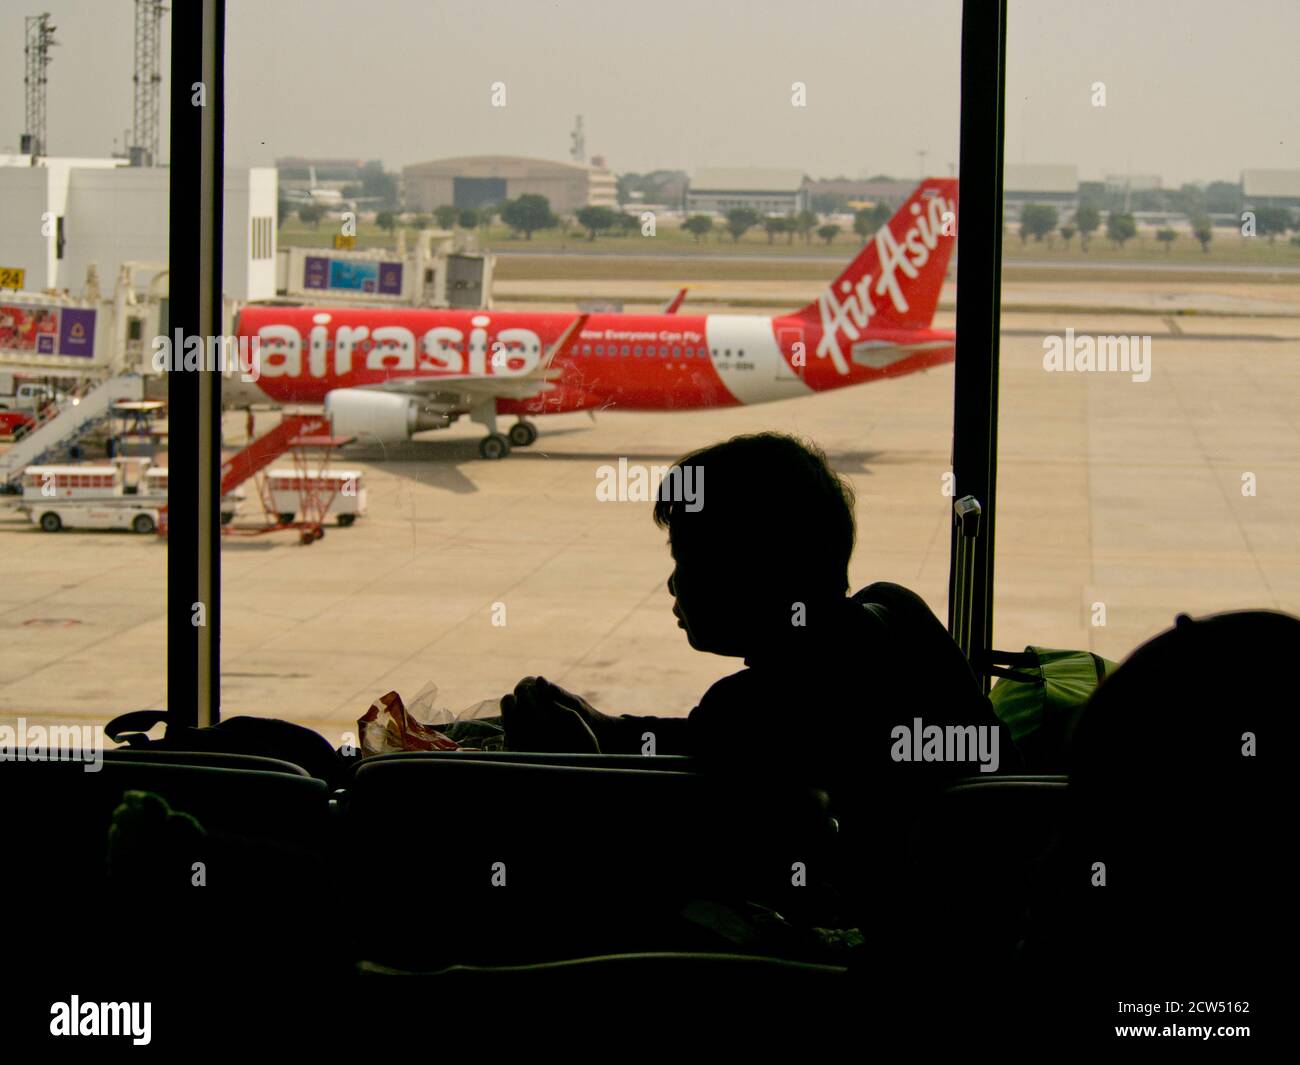 Passengers, airplanes and services at the terminal of Yangon international airport, Myanmar,SE Asia Stock Photo